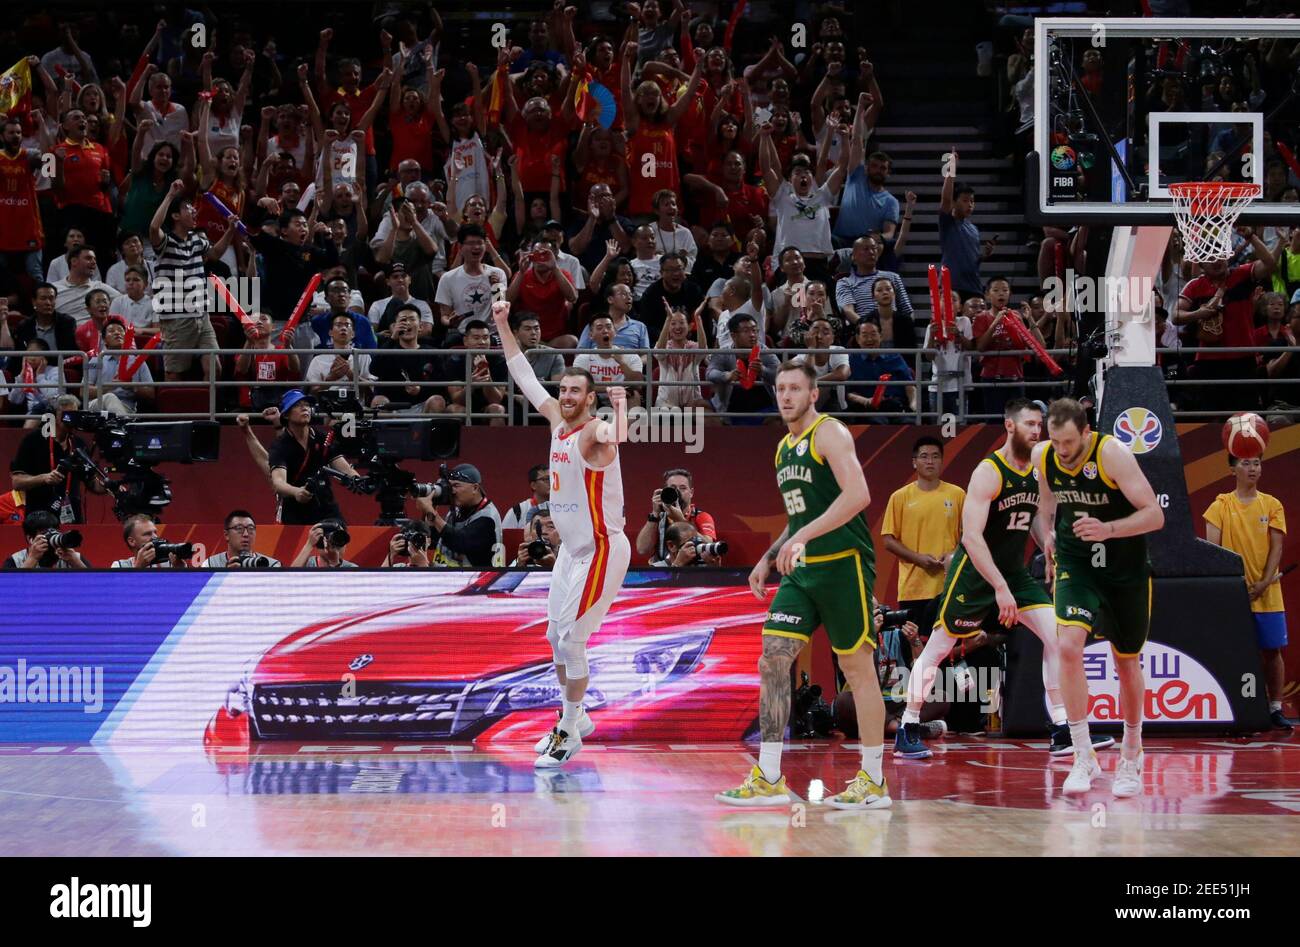 Basketball - FIBA World Cup - Semi Finals - Spain v Australia - Wukesong Sport Arena, Beijing, China - September 13, 2019  Spain's Victor Claver celebrates victory after the match REUTERS/Jason Lee Stock Photo